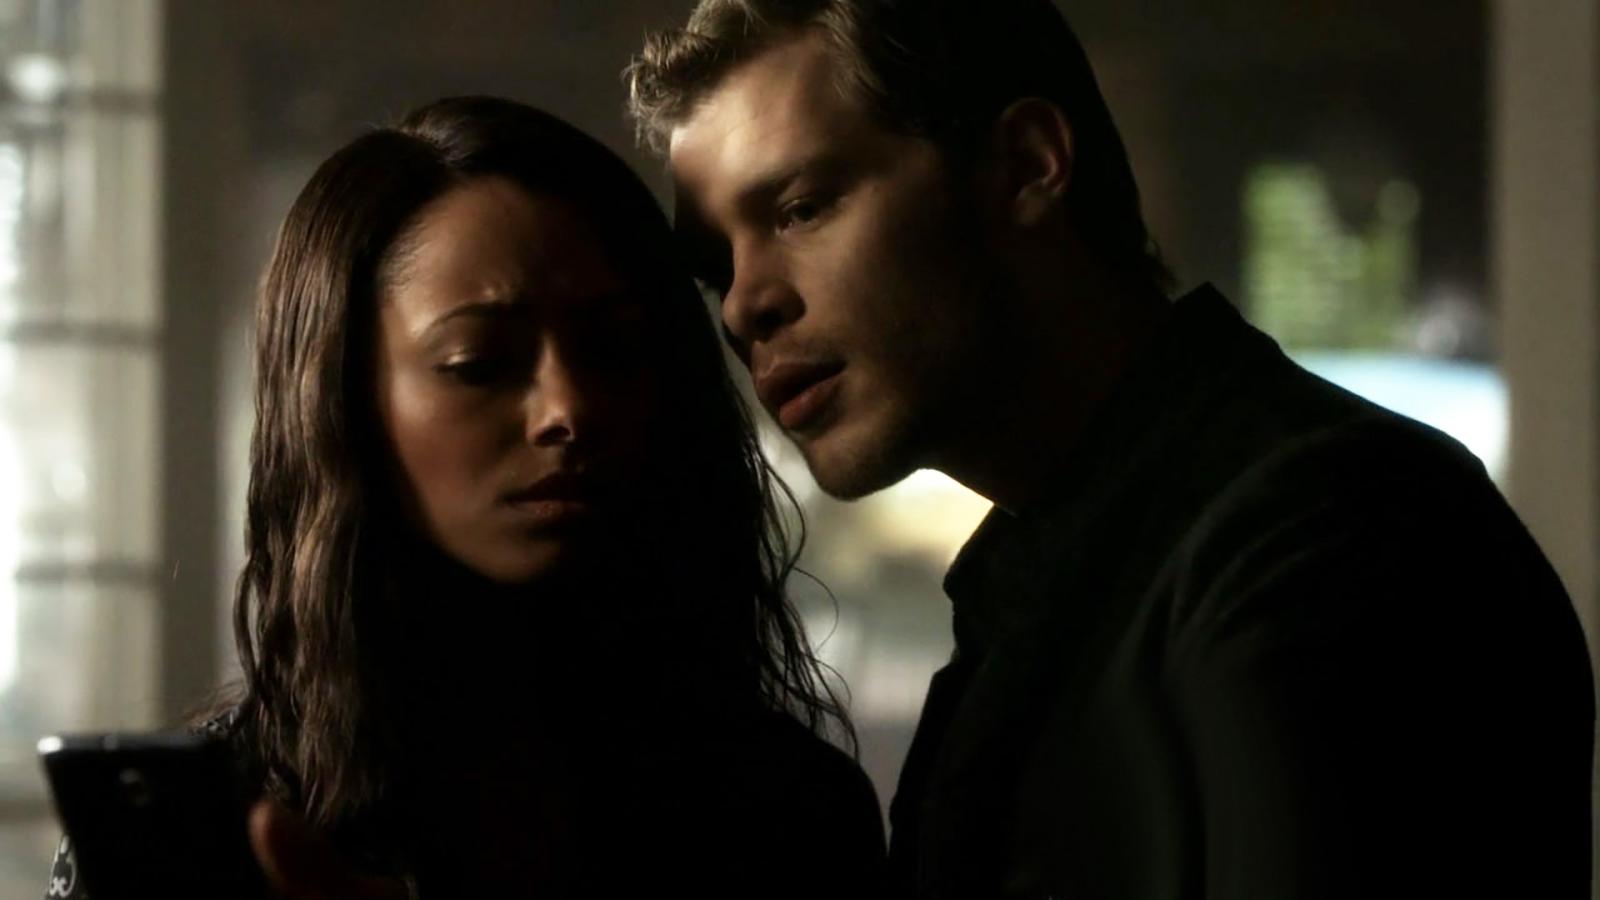 Bonnie & Klaus Relationship is The Vampire Diaries' Biggest Missed Opportunity - image 1